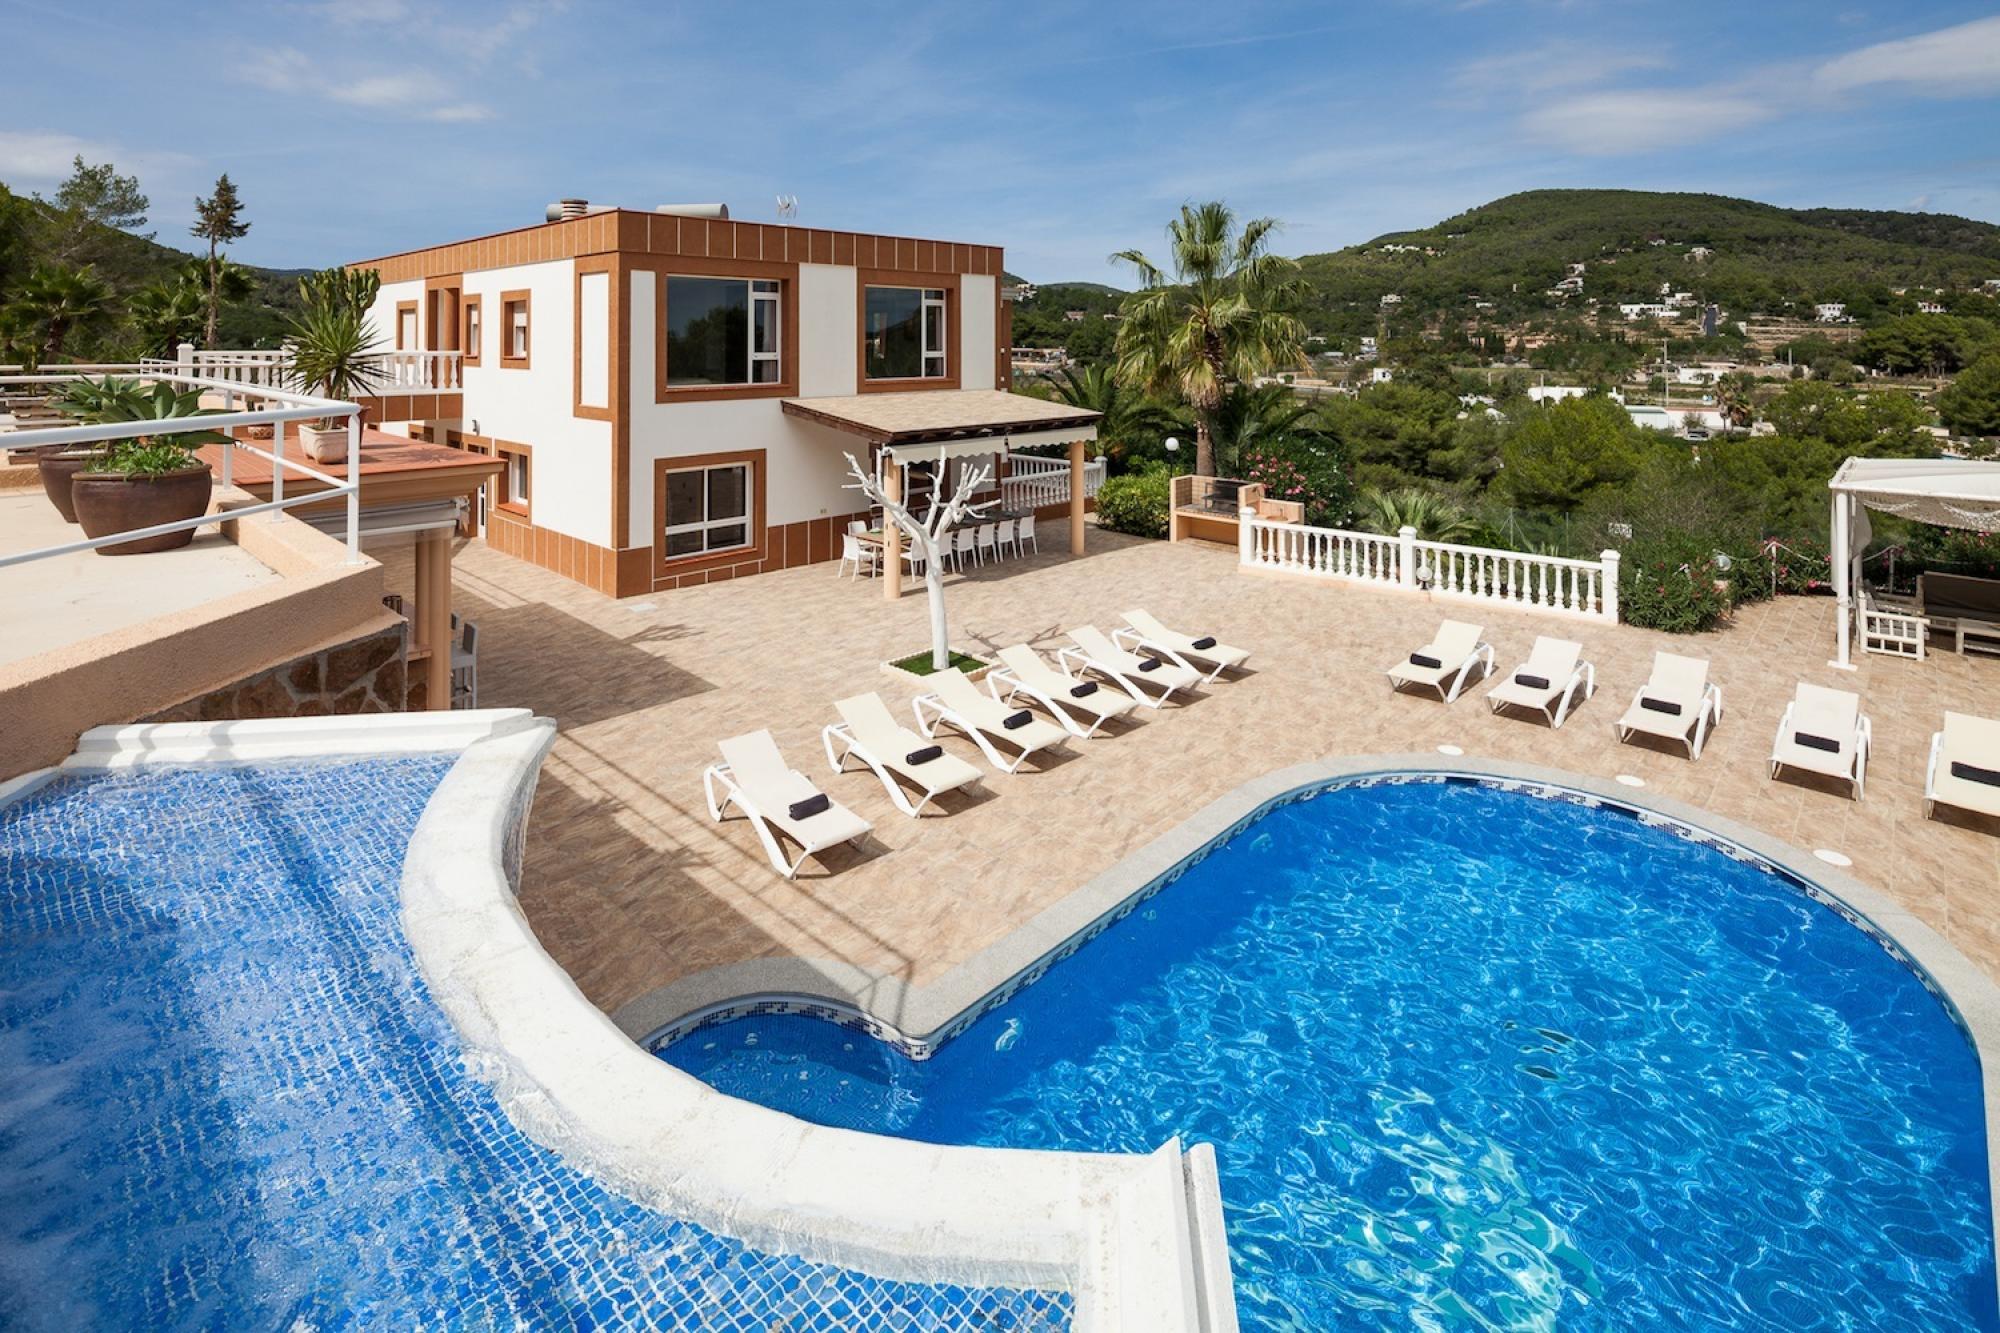 Property Image 2 - Wonderful Stunning Villa with Tennis Court and Pool Boasting Amazing Views over Ibiza Countryside